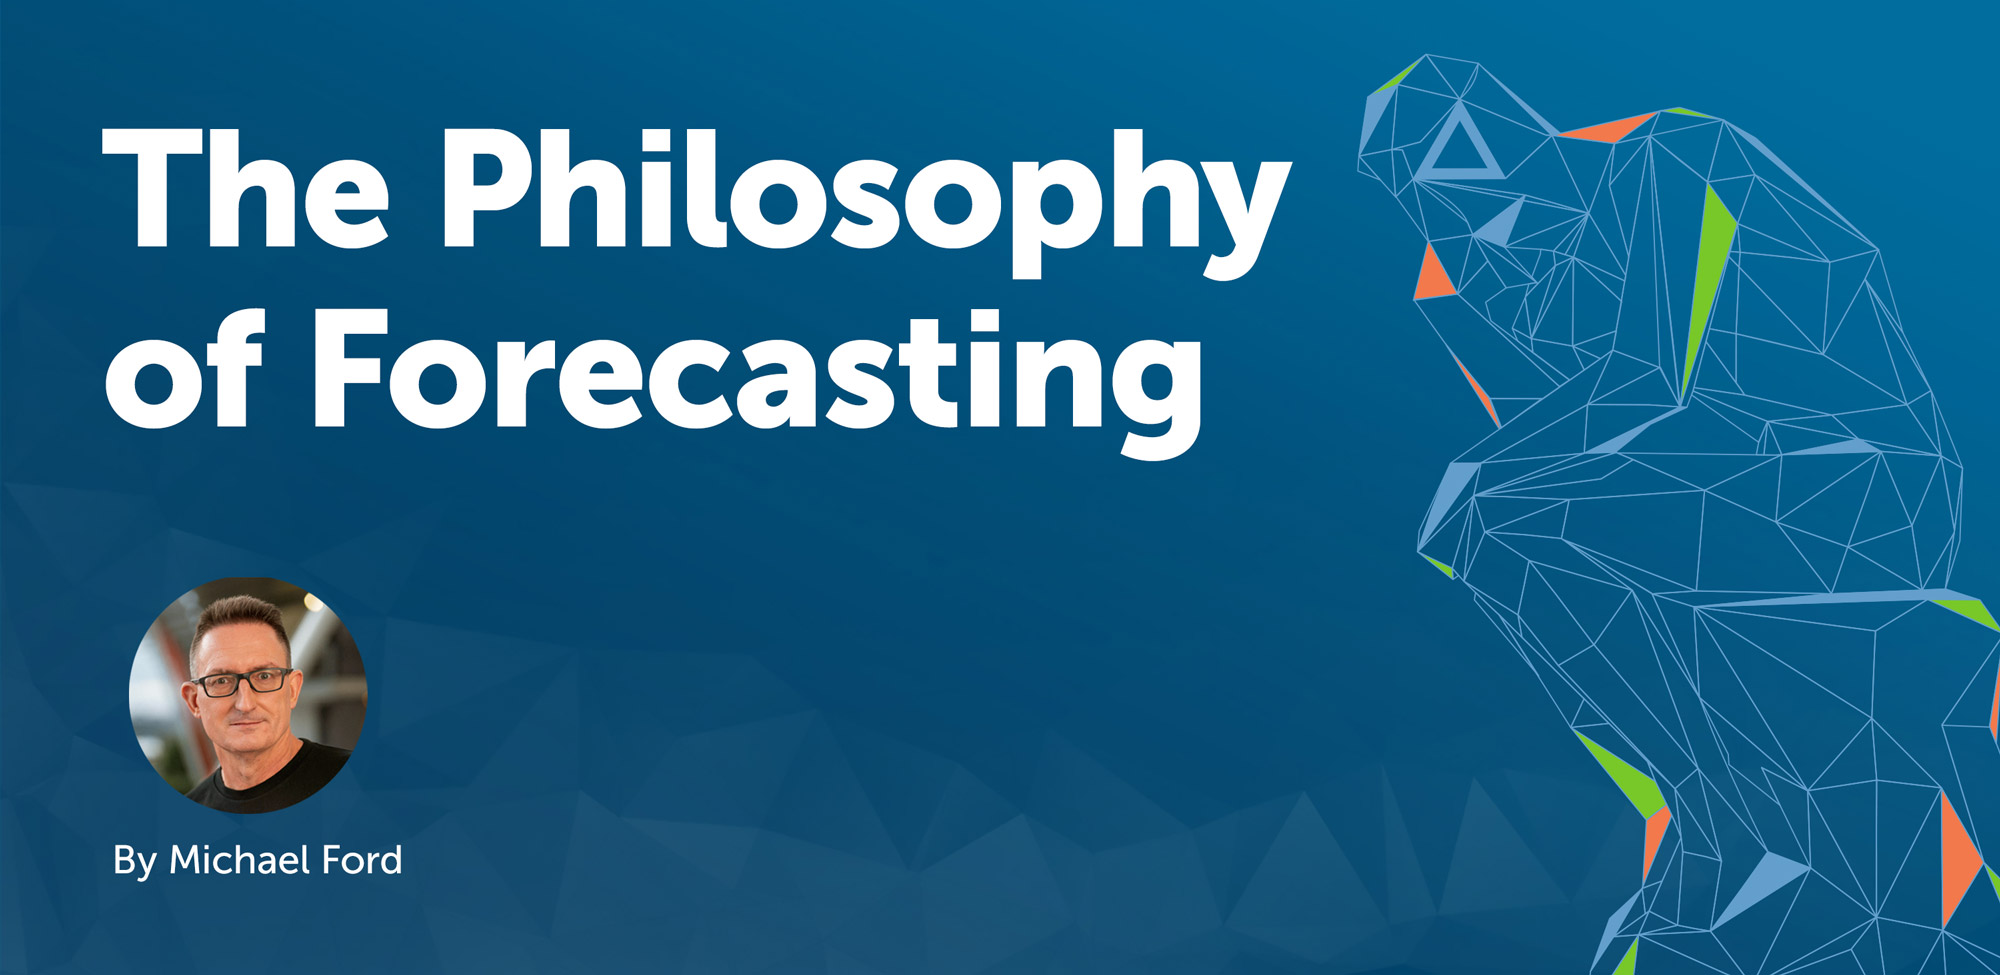 The philosophy of forecasting